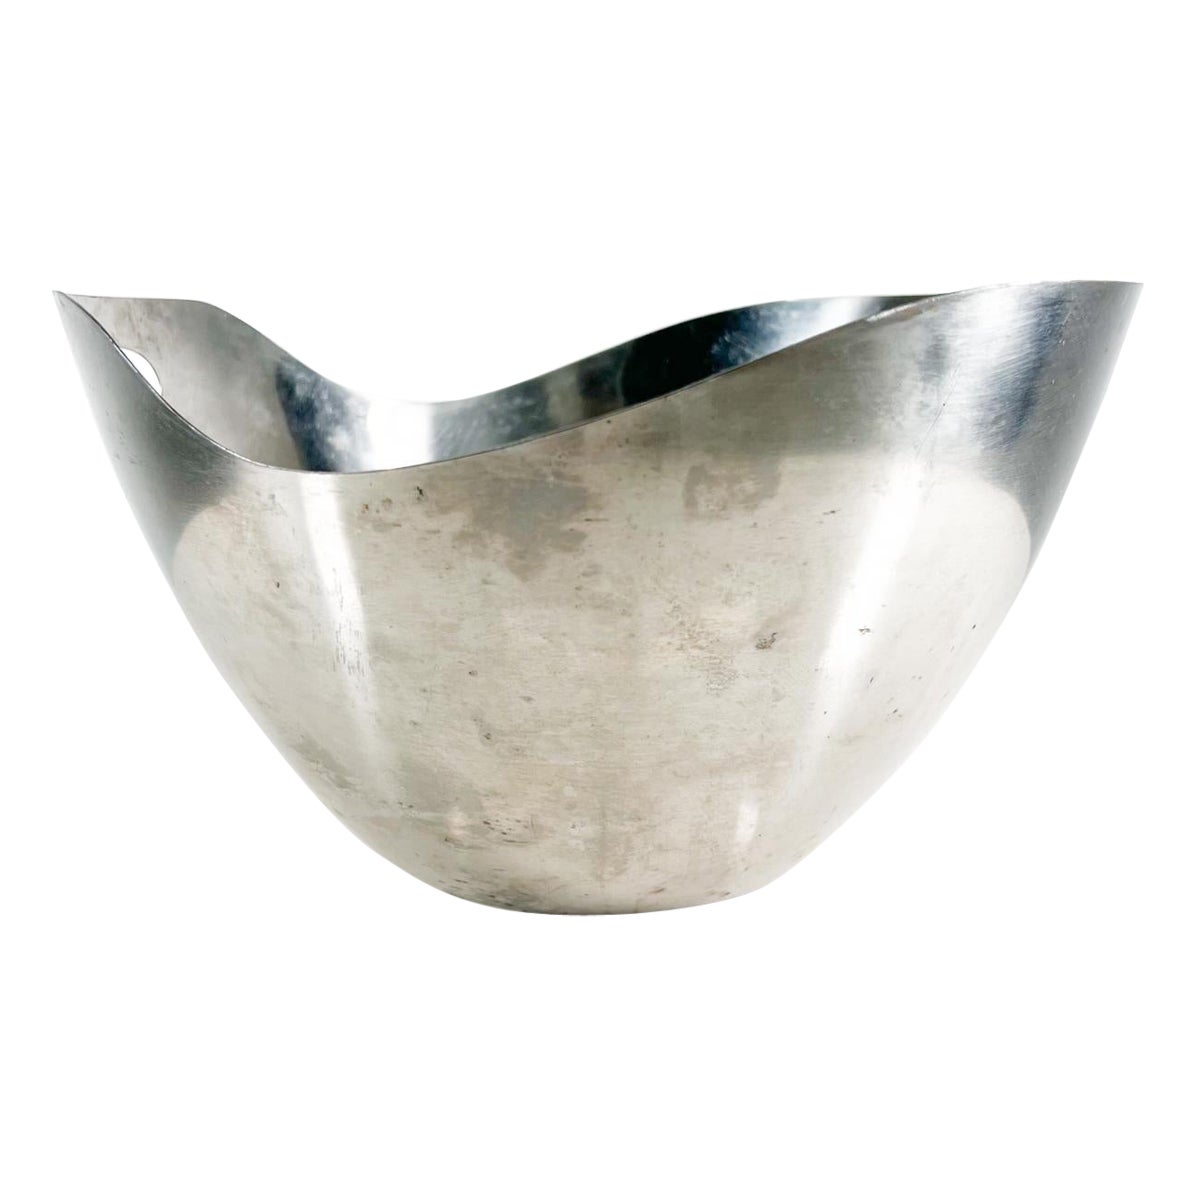 1960s Modern Sculptural Stainless-Steel Wave Salad Bowl from Japan